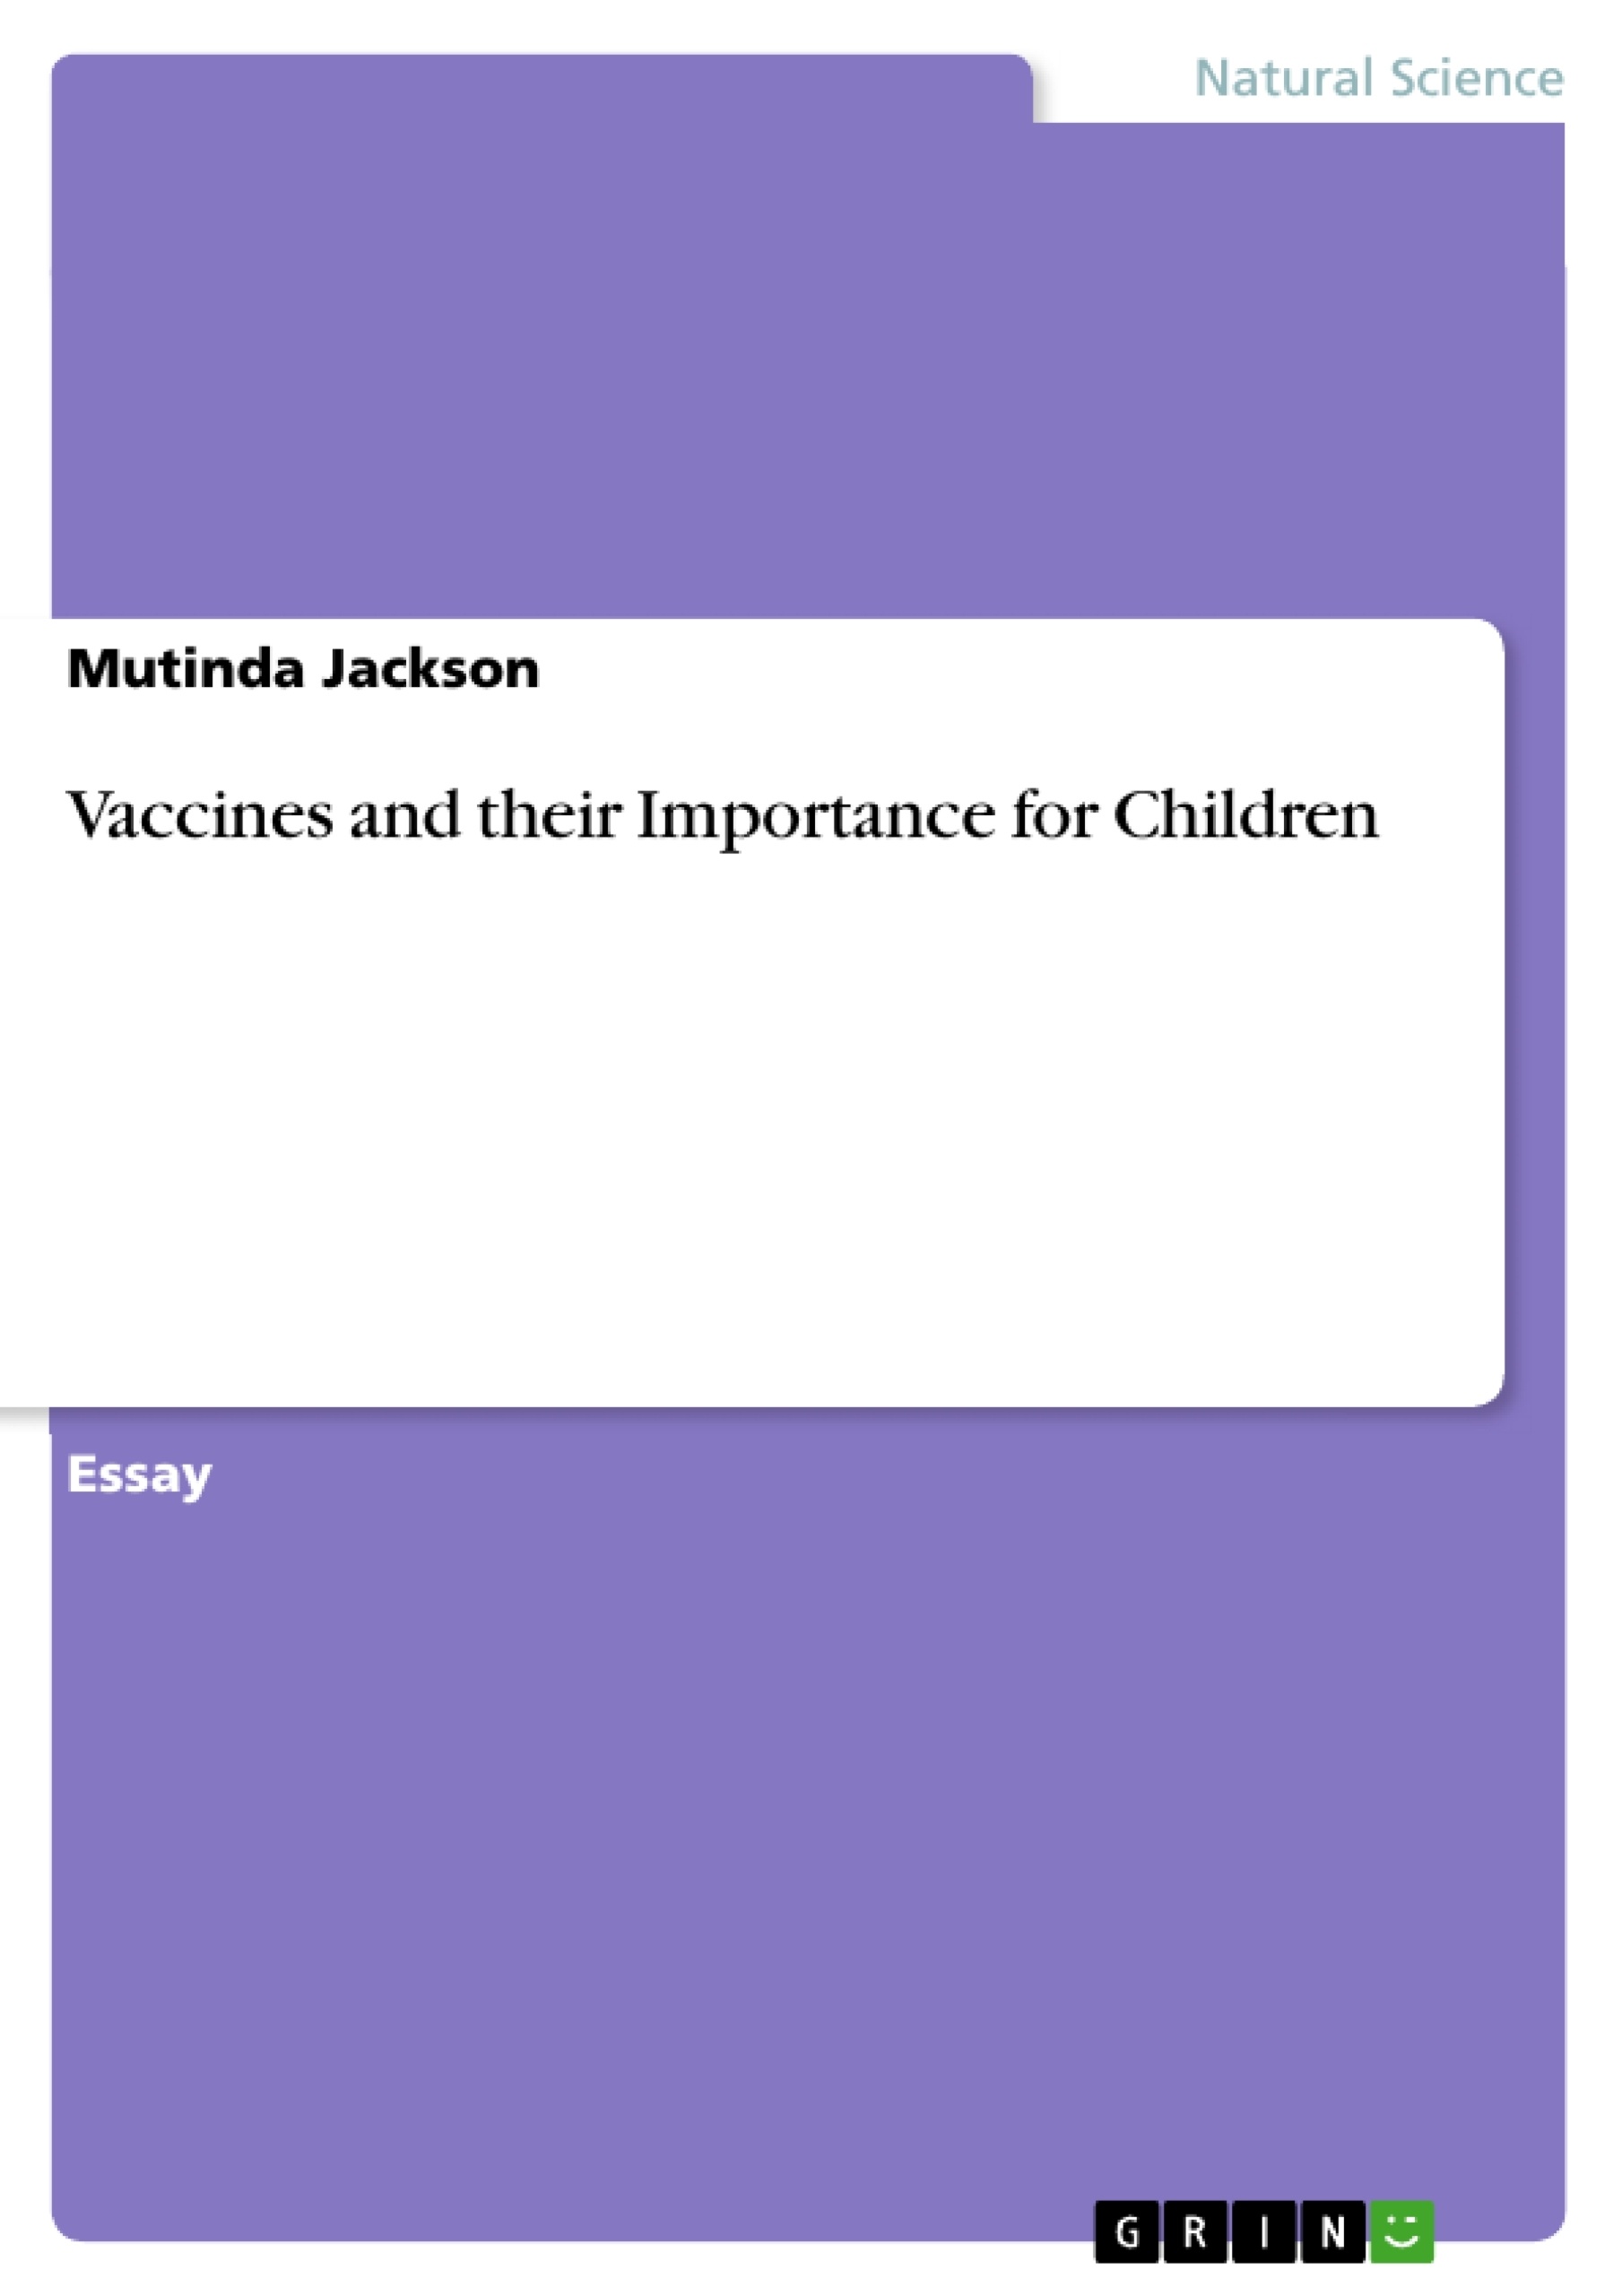 Titre: Vaccines and their Importance for Children